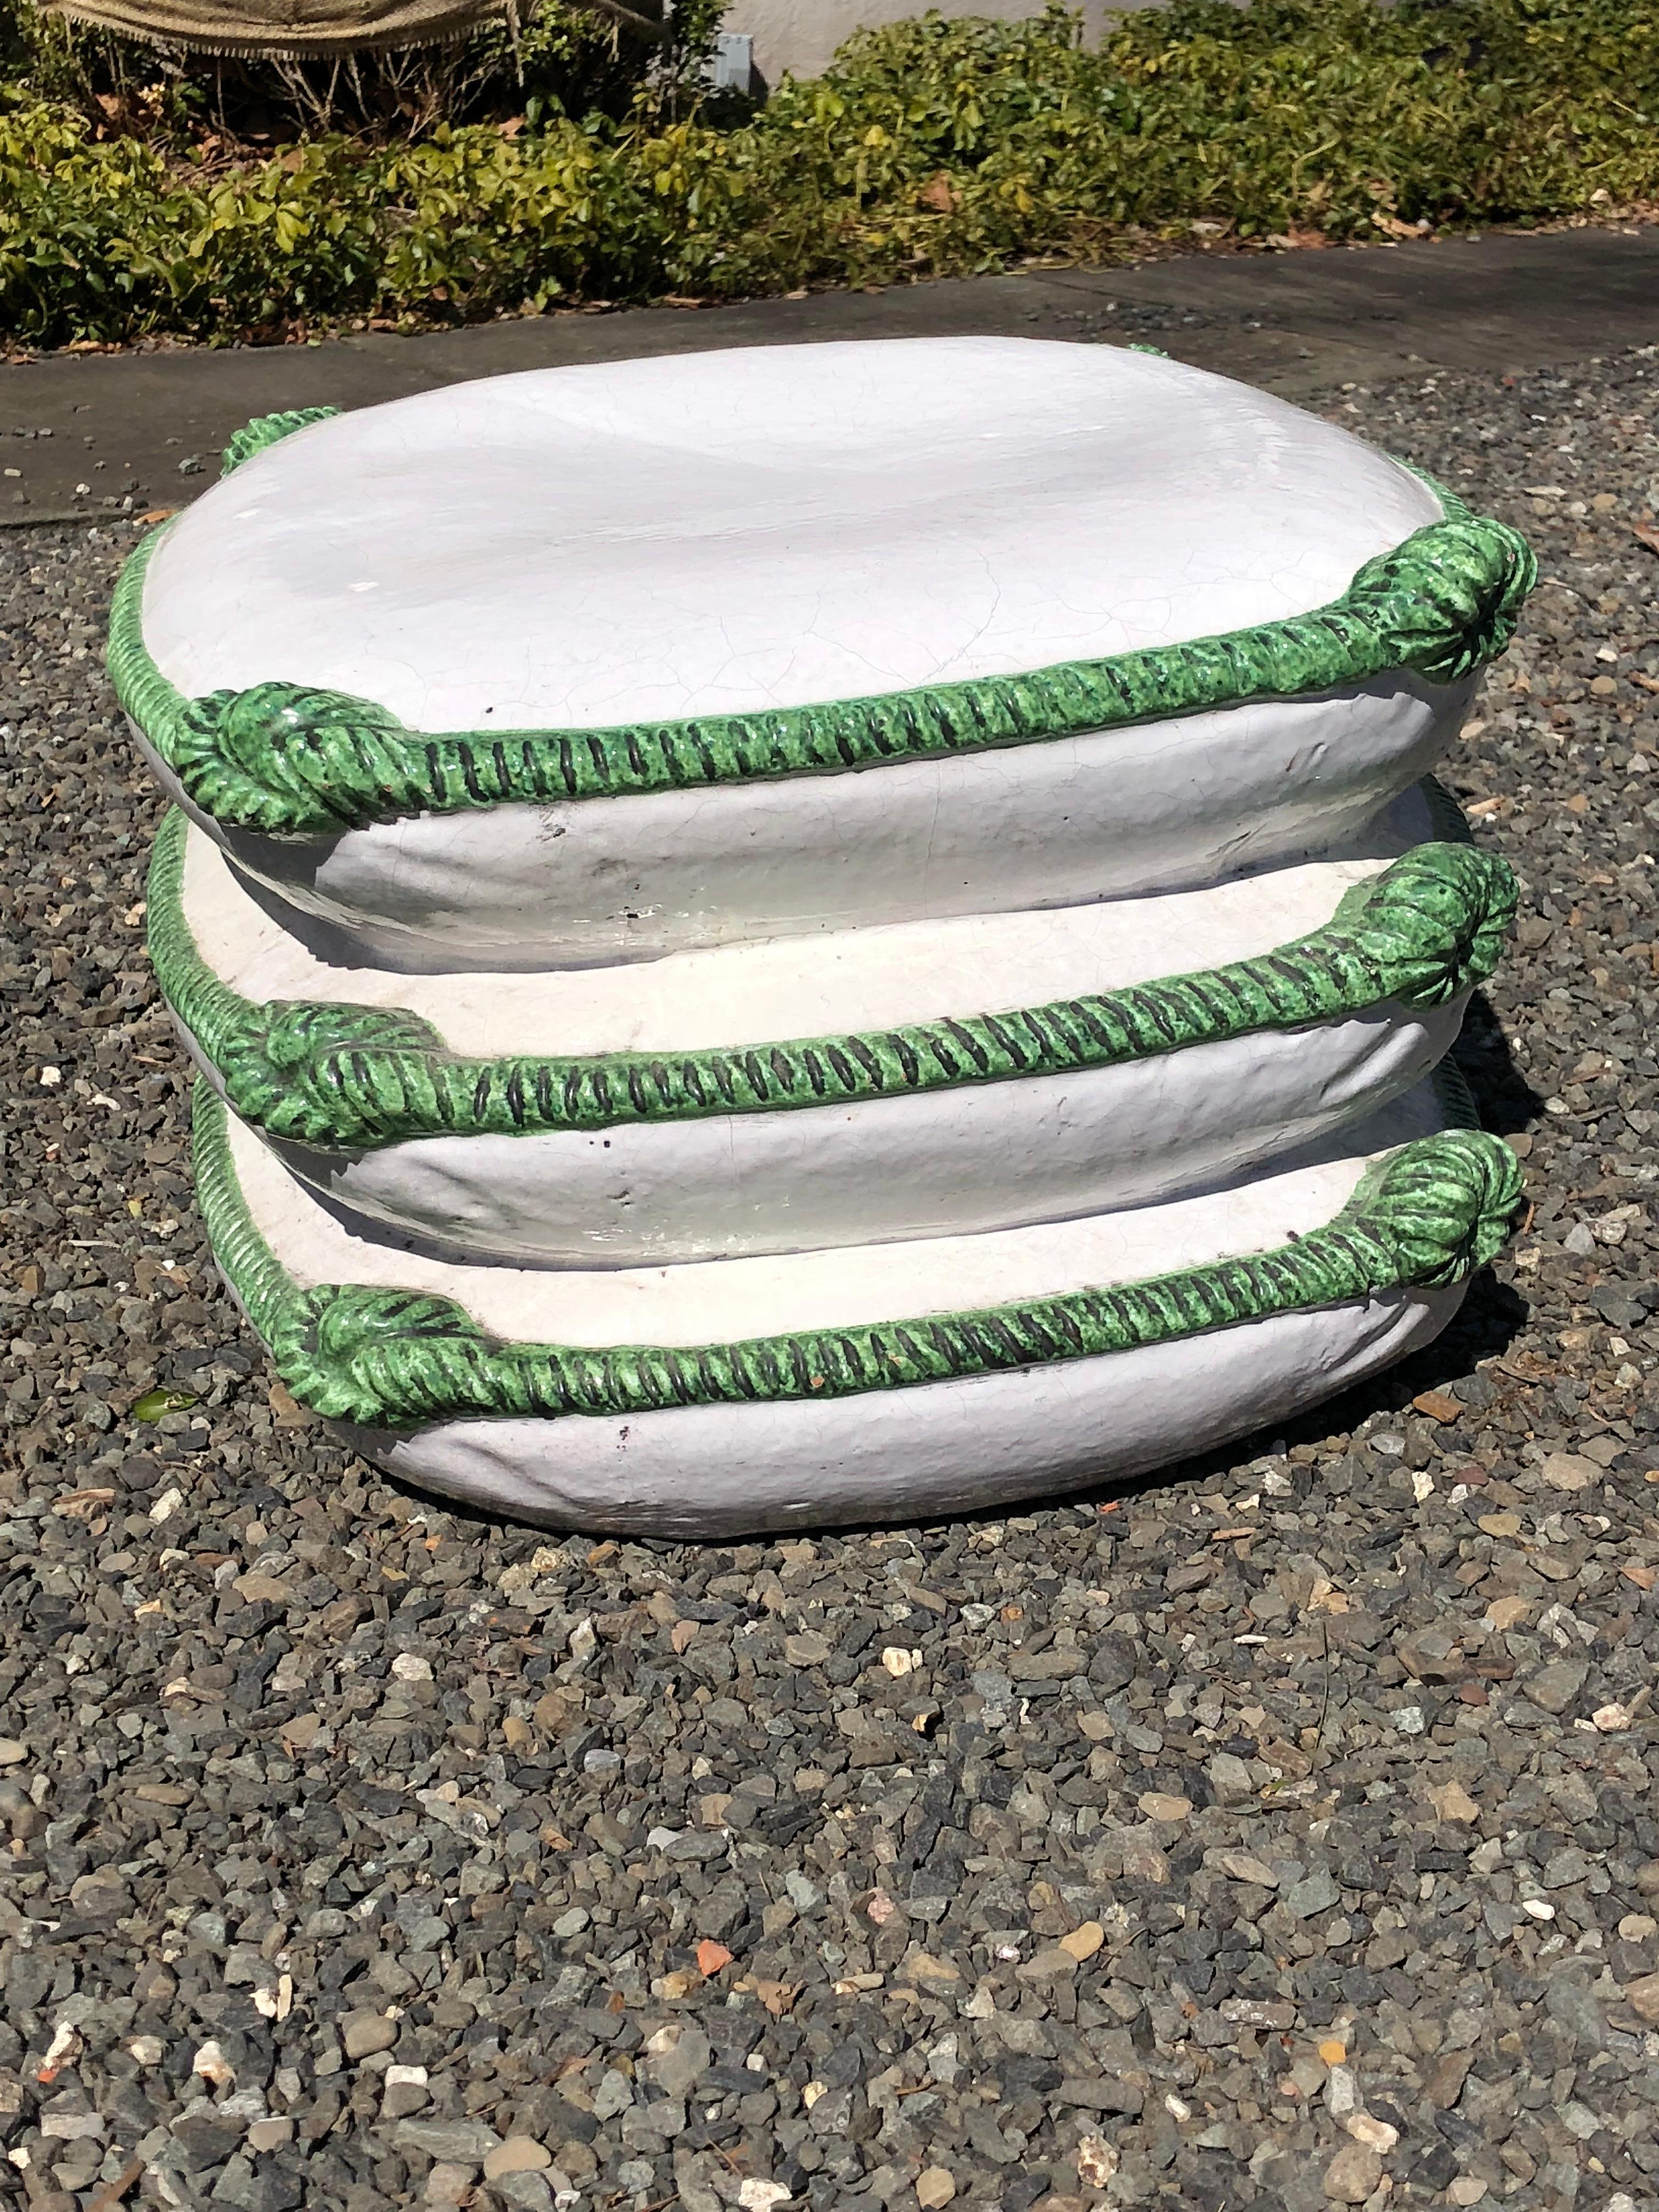 Unique pillow form Majolica garden seat in white ceramic with emerald green roping and knots. The color combination of this piece of Majolica is quite striking and would look great both in the garden or indoors.